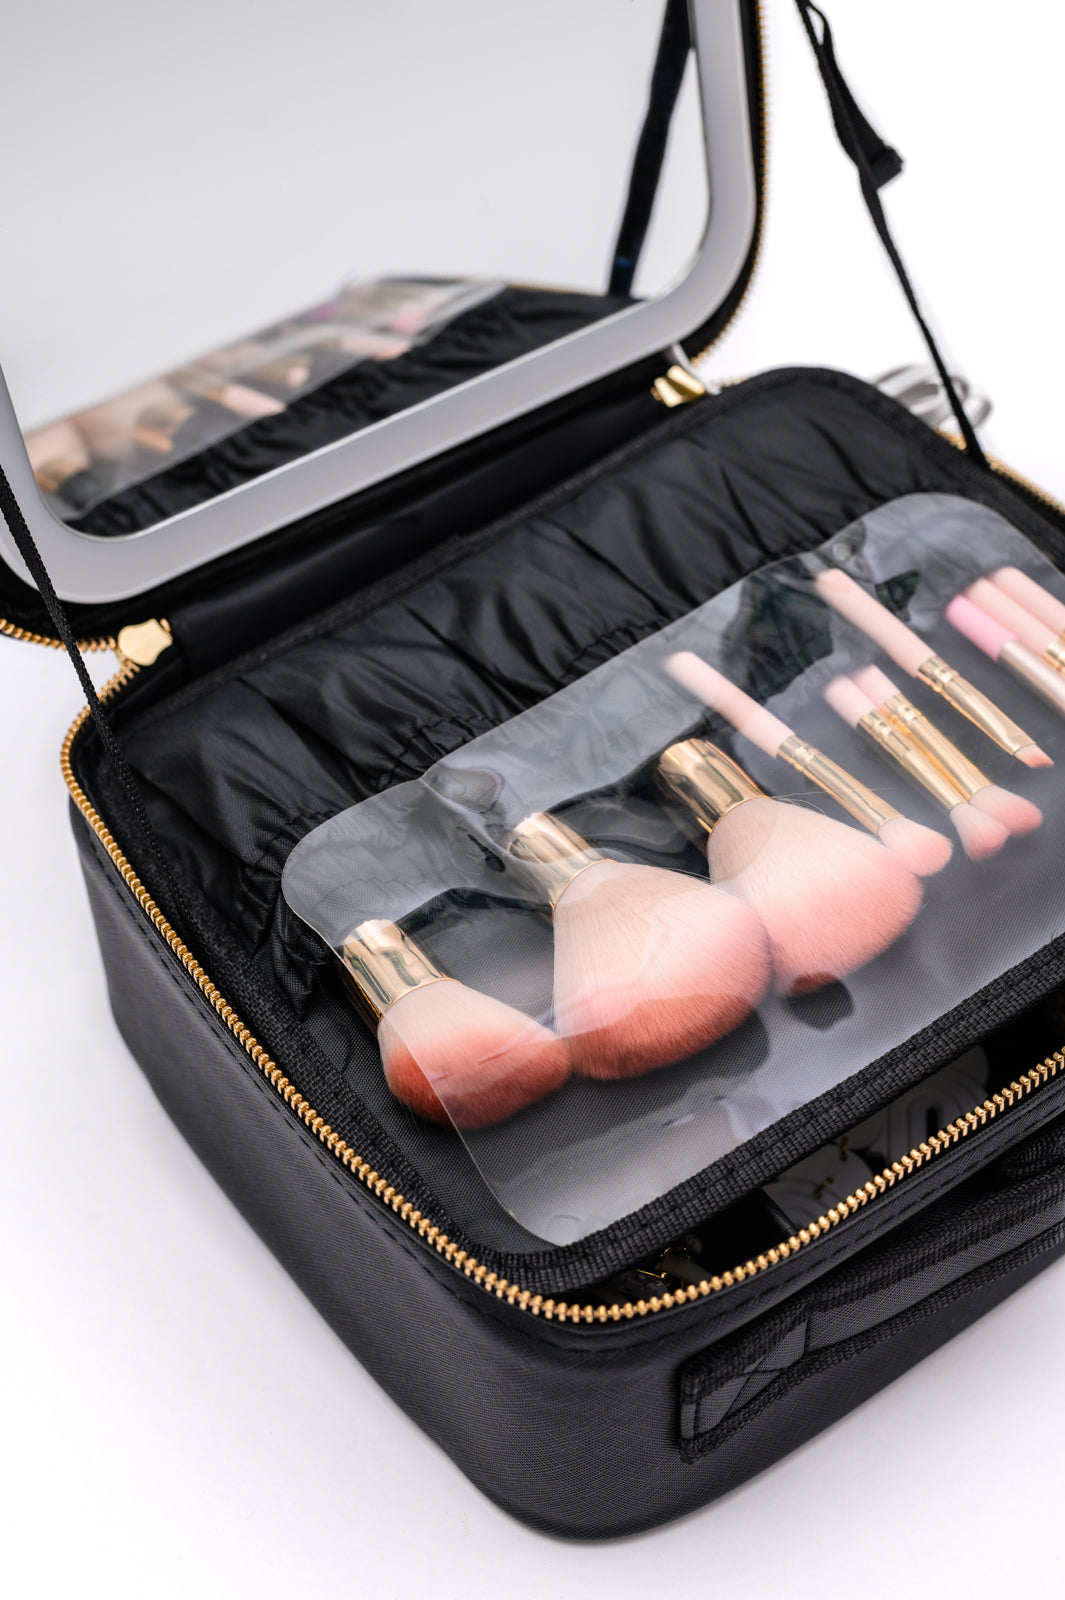 She's All That LED Makeup Case in Black - Southern Soul Collectives